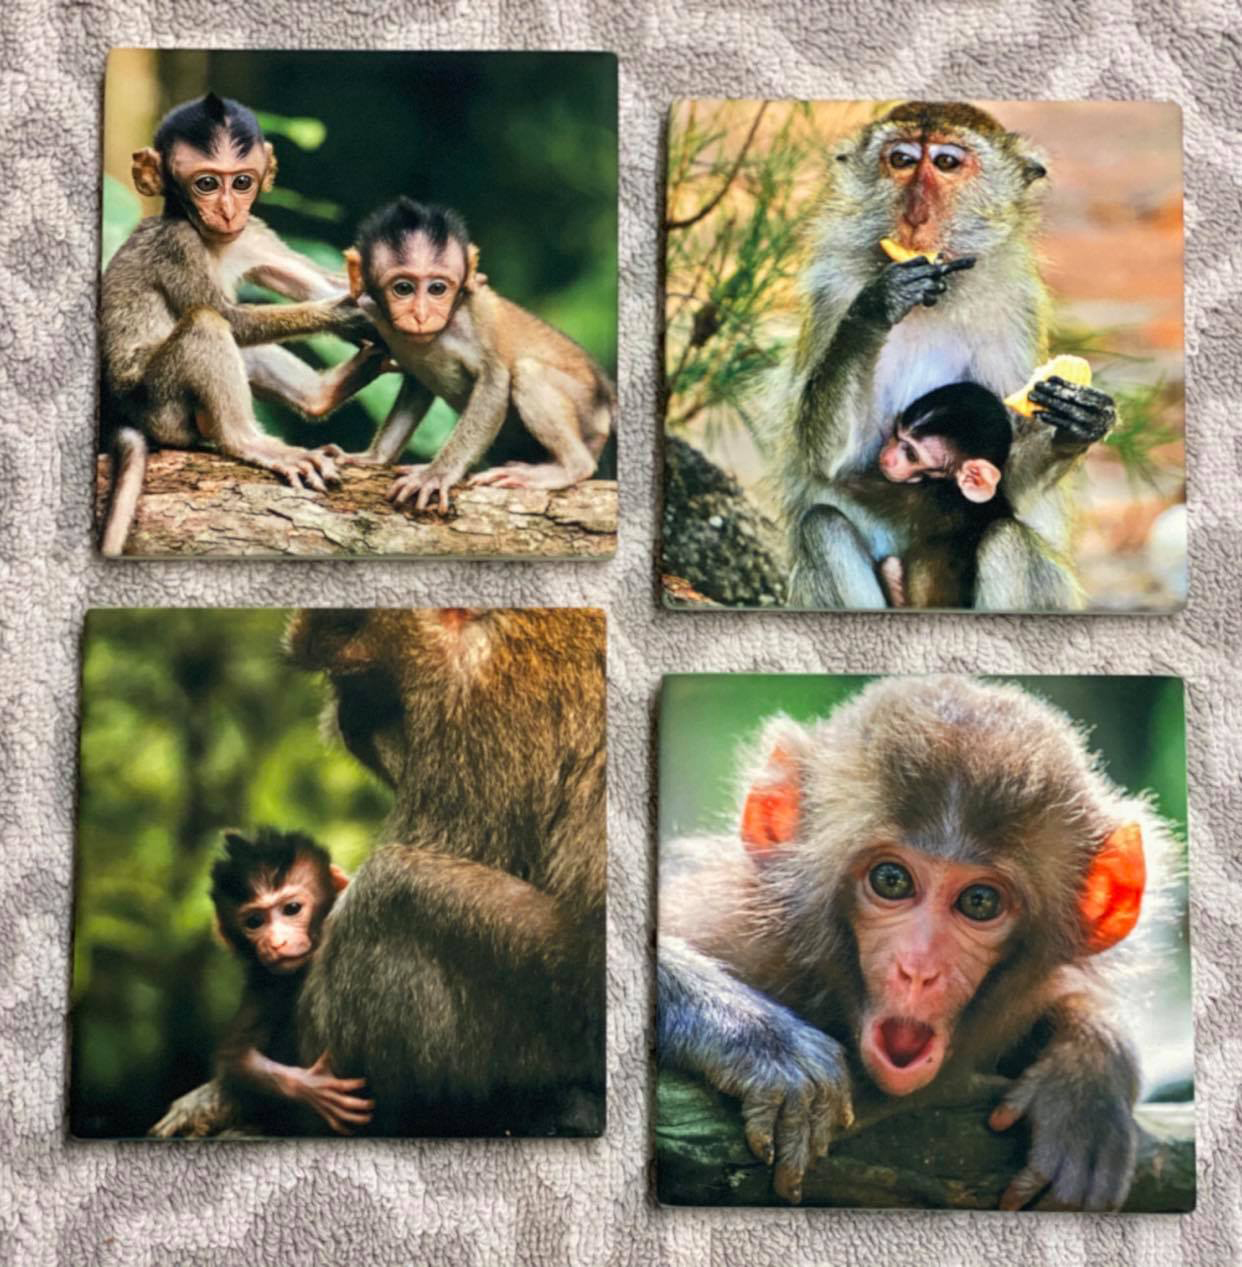 Monkey's at their best made with sublimation printing